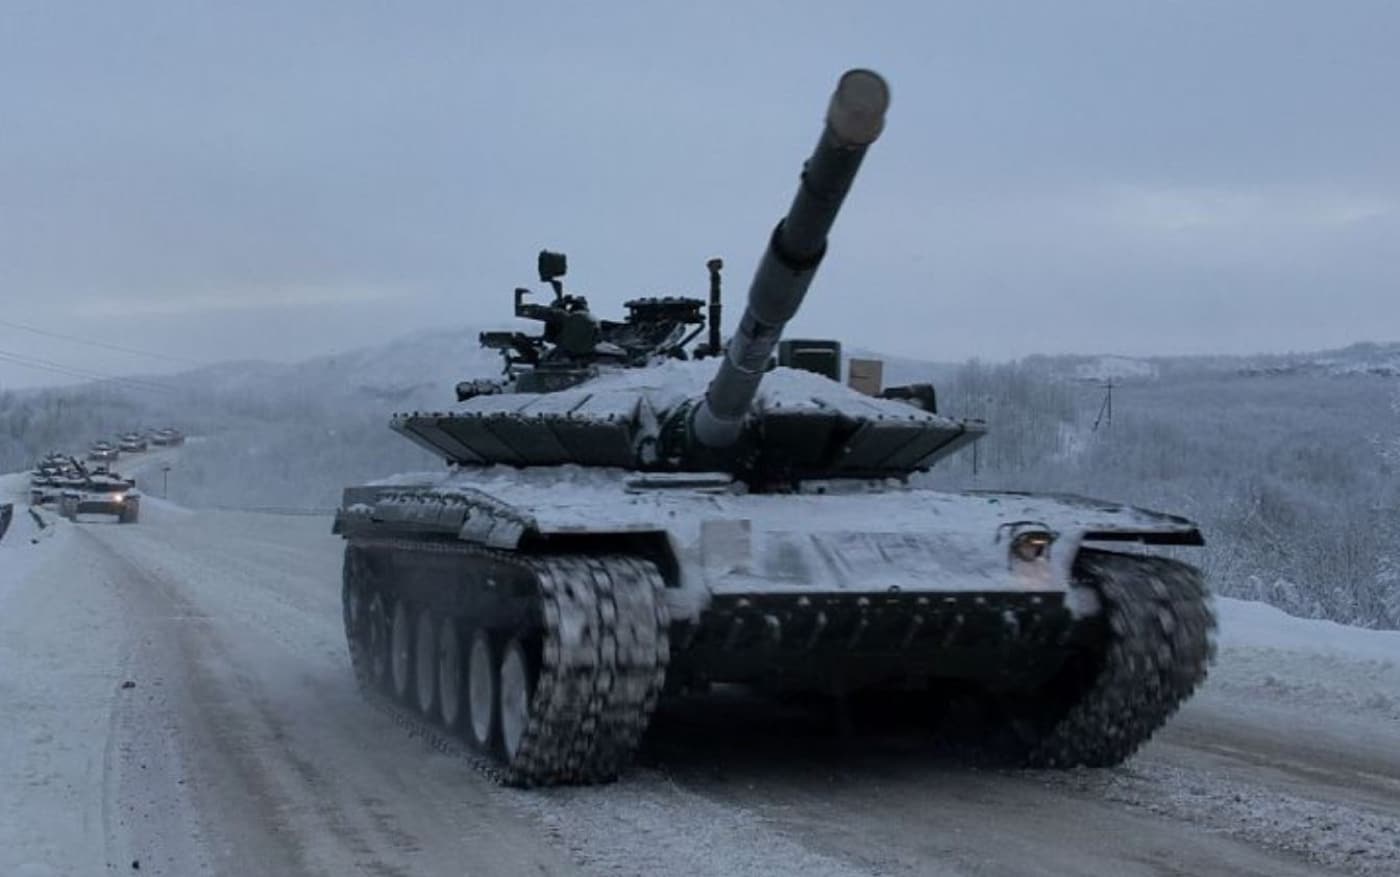 This image shows a Russian T-80BVM tank driving in a column down a road inside the Arctic Circle. The tank and road are covered in snow and ice due to the winter conditions.